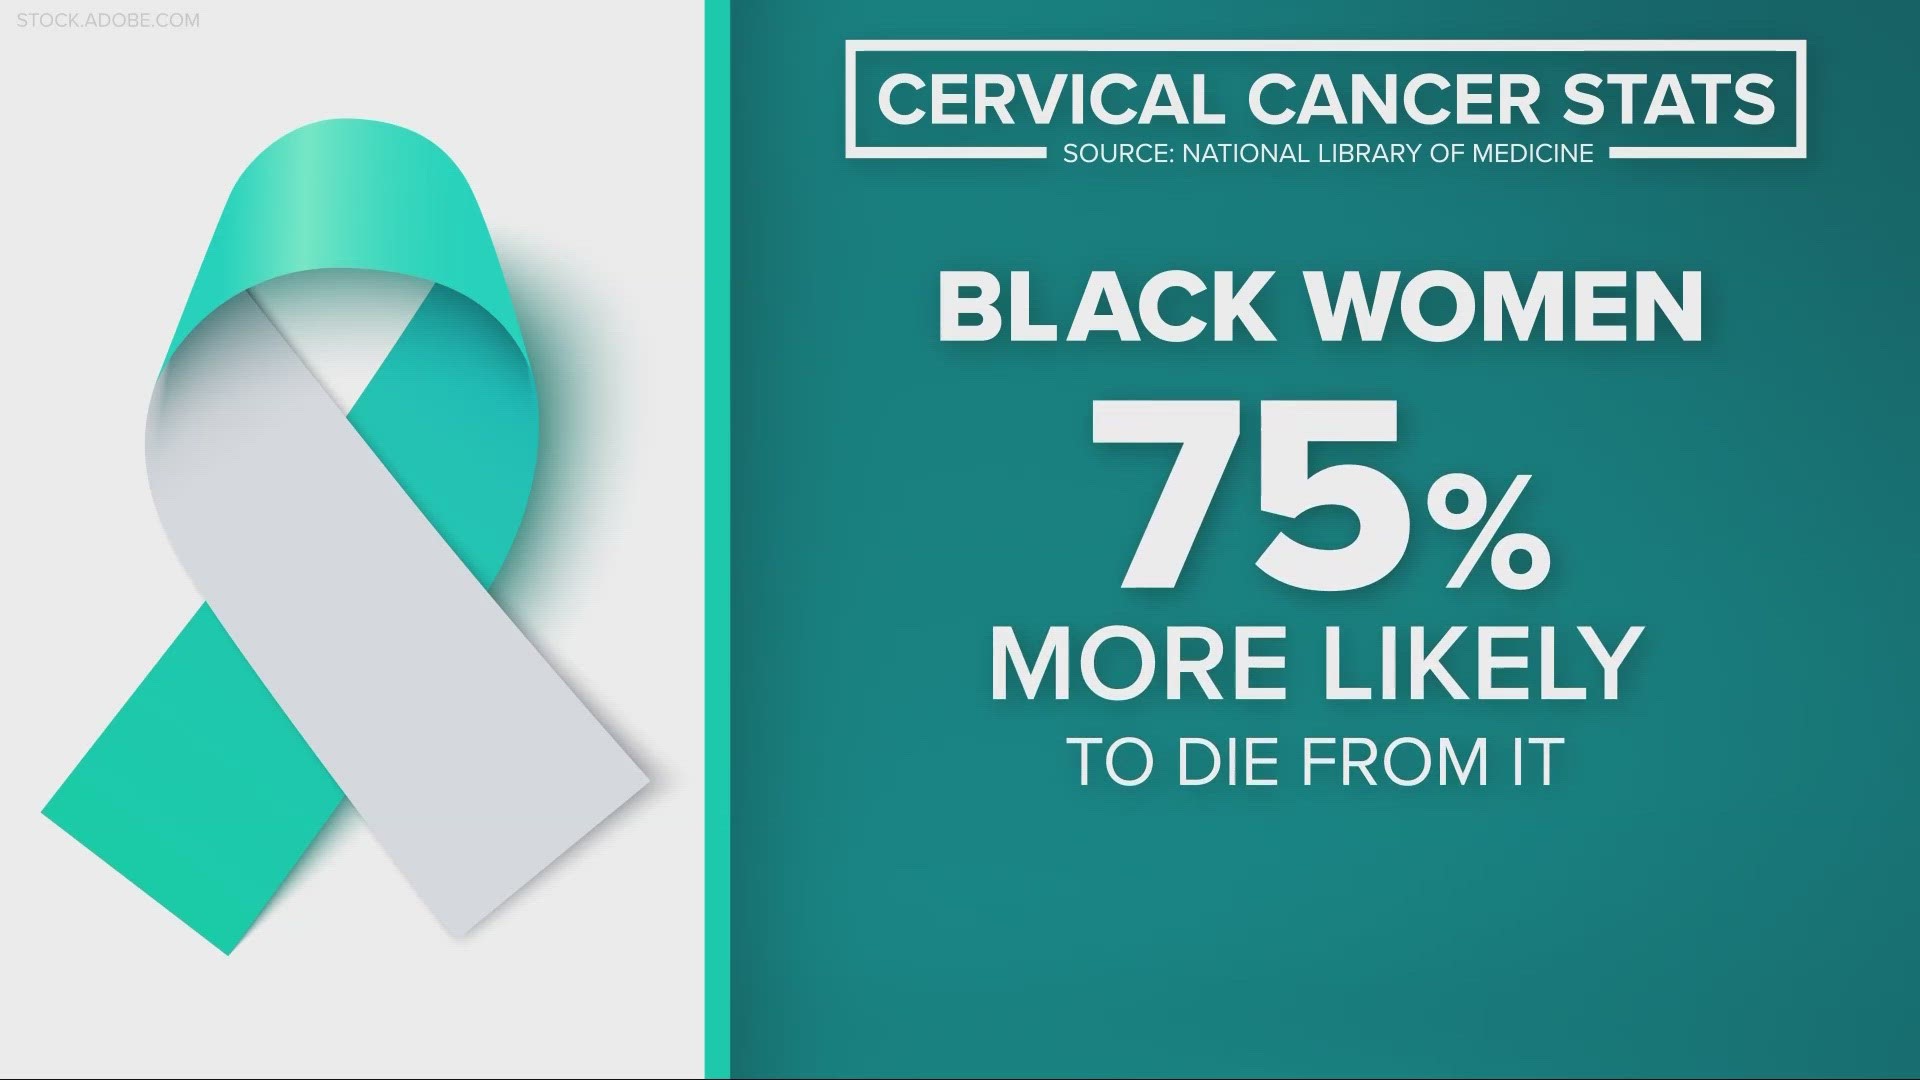 In Ohio, the mortality rate for Black people battling cancer is 6 percent higher than white people, according to the state’s department of health.